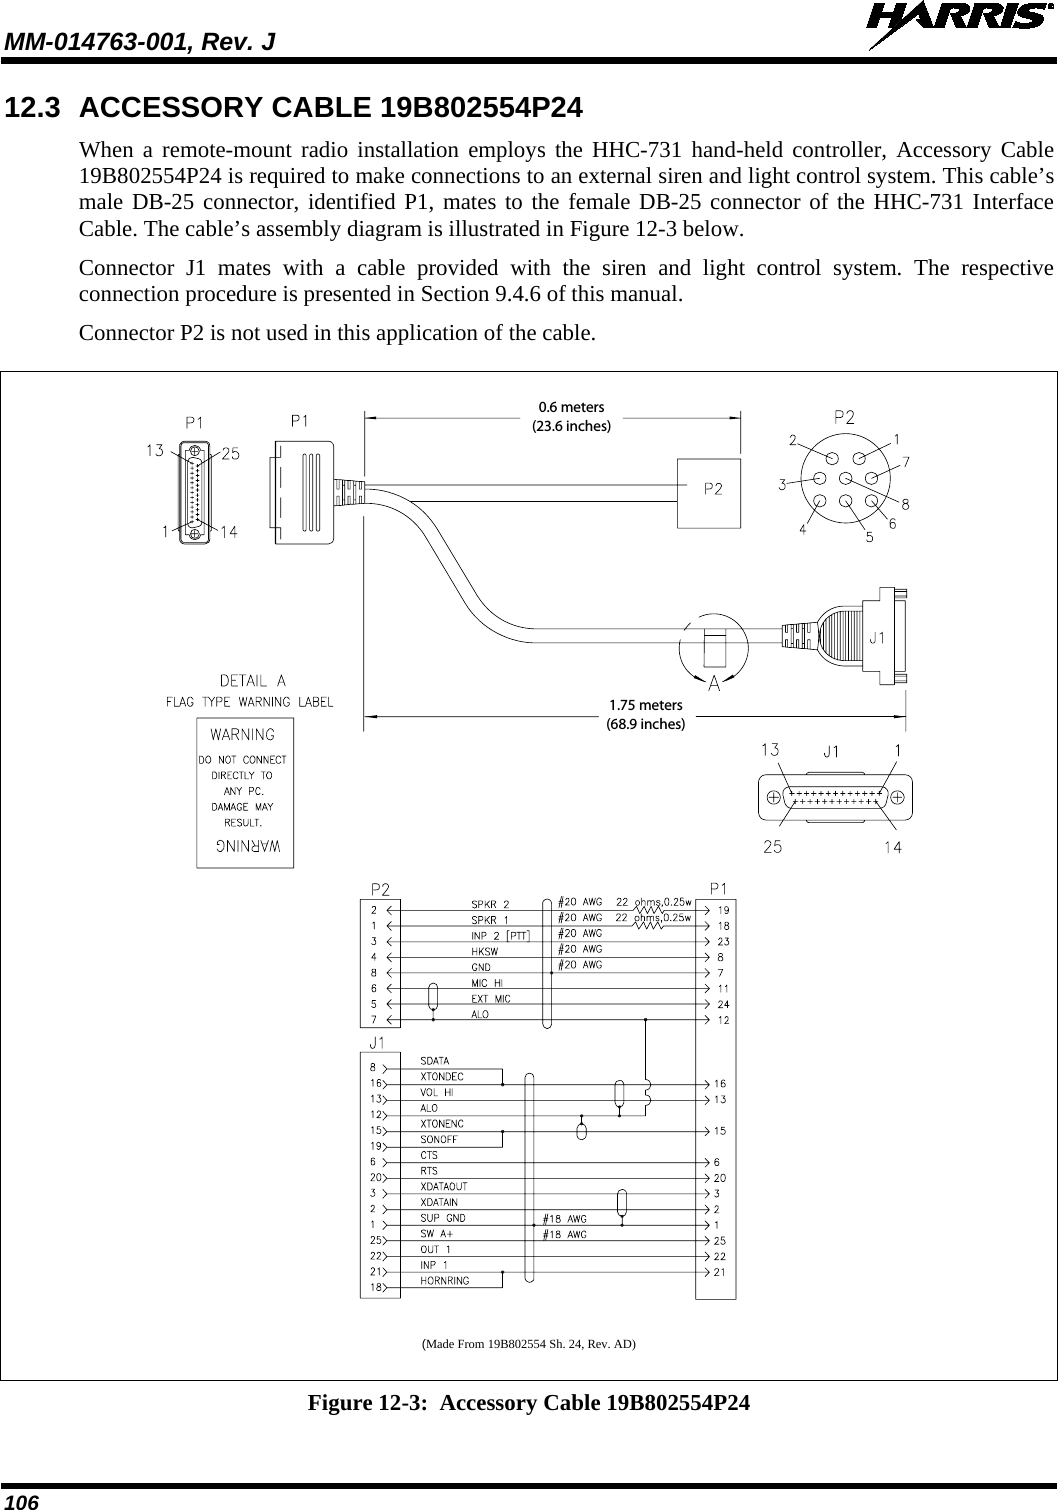 MM-014763-001, Rev. J   106 12.3 ACCESSORY CABLE 19B802554P24 When a remote-mount radio installation employs the HHC-731 hand-held controller, Accessory Cable 19B802554P24 is required to make connections to an external siren and light control system. This cable’s male DB-25 connector, identified P1, mates to the female DB-25 connector of the HHC-731 Interface Cable. The cable’s assembly diagram is illustrated in Figure 12-3 below. Connector J1 mates with a cable provided with the siren and light control system. The respective connection procedure is presented in Section 9.4.6 of this manual. Connector P2 is not used in this application of the cable.    (Made From 19B802554 Sh. 24, Rev. AD)  Figure 12-3:  Accessory Cable 19B802554P24  0.6 meters(23.6 inches)1.75 meters(68.9 inches)